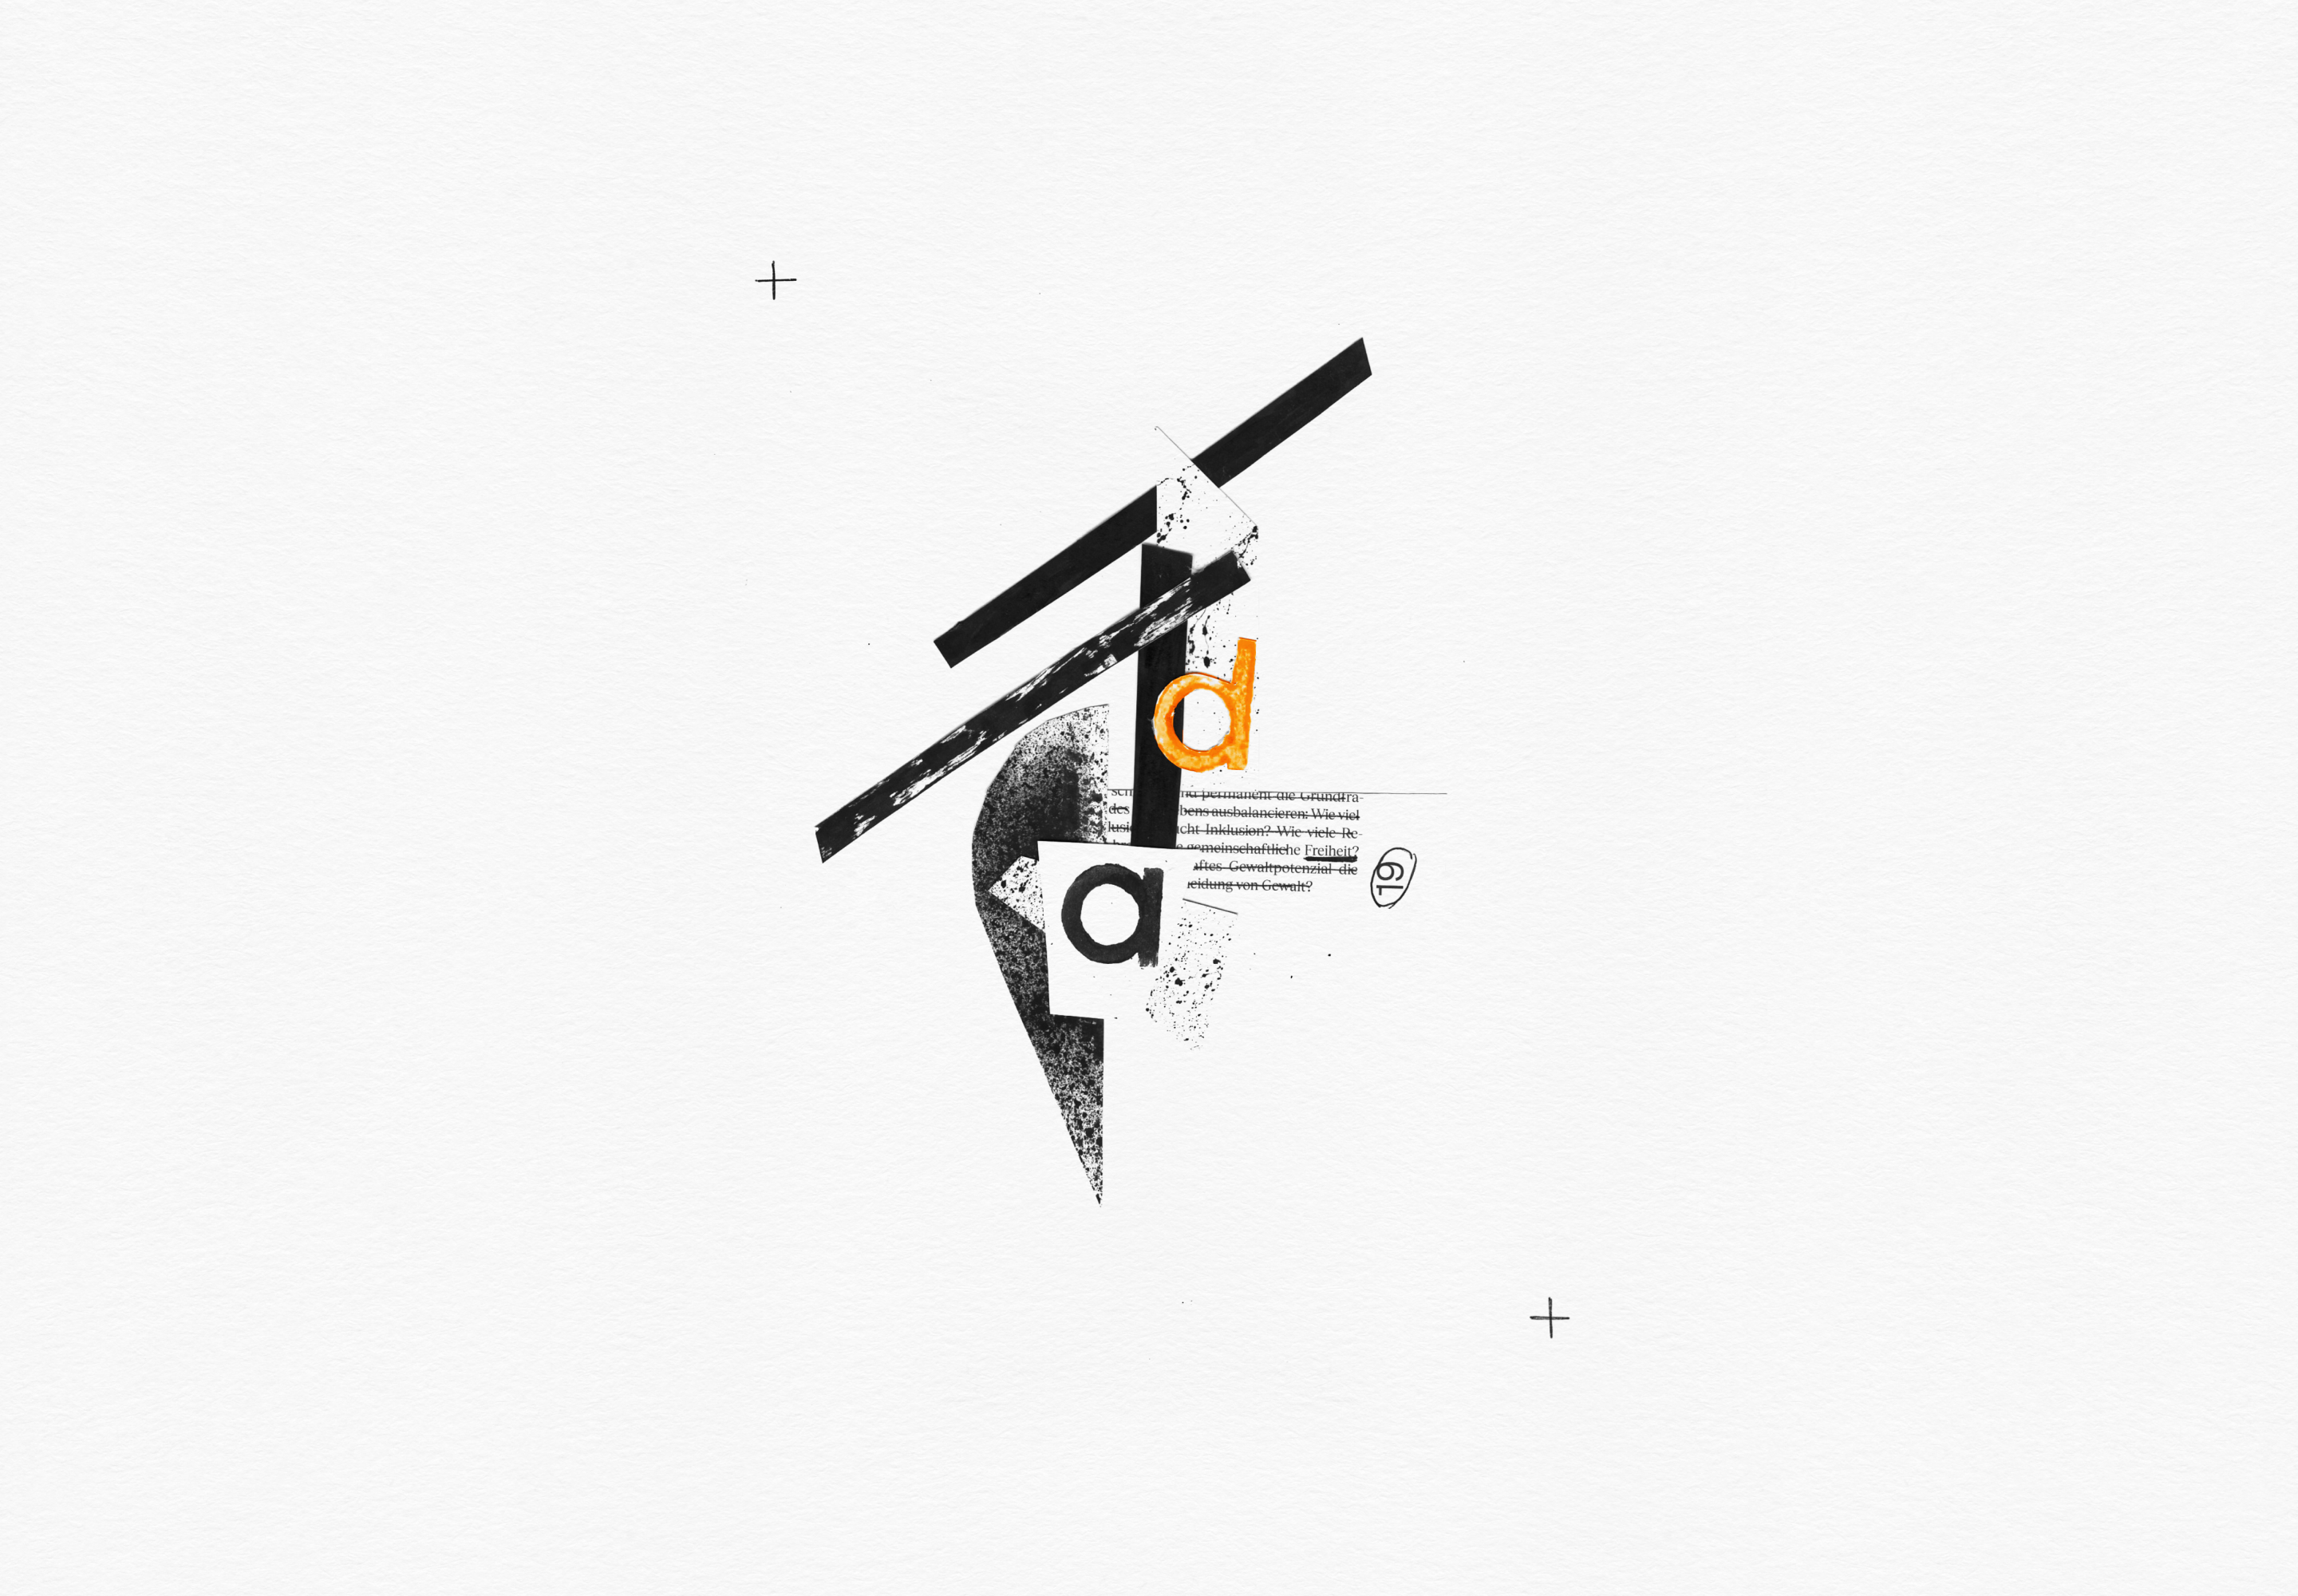 Minimalistic collage with typography and abstract shapes